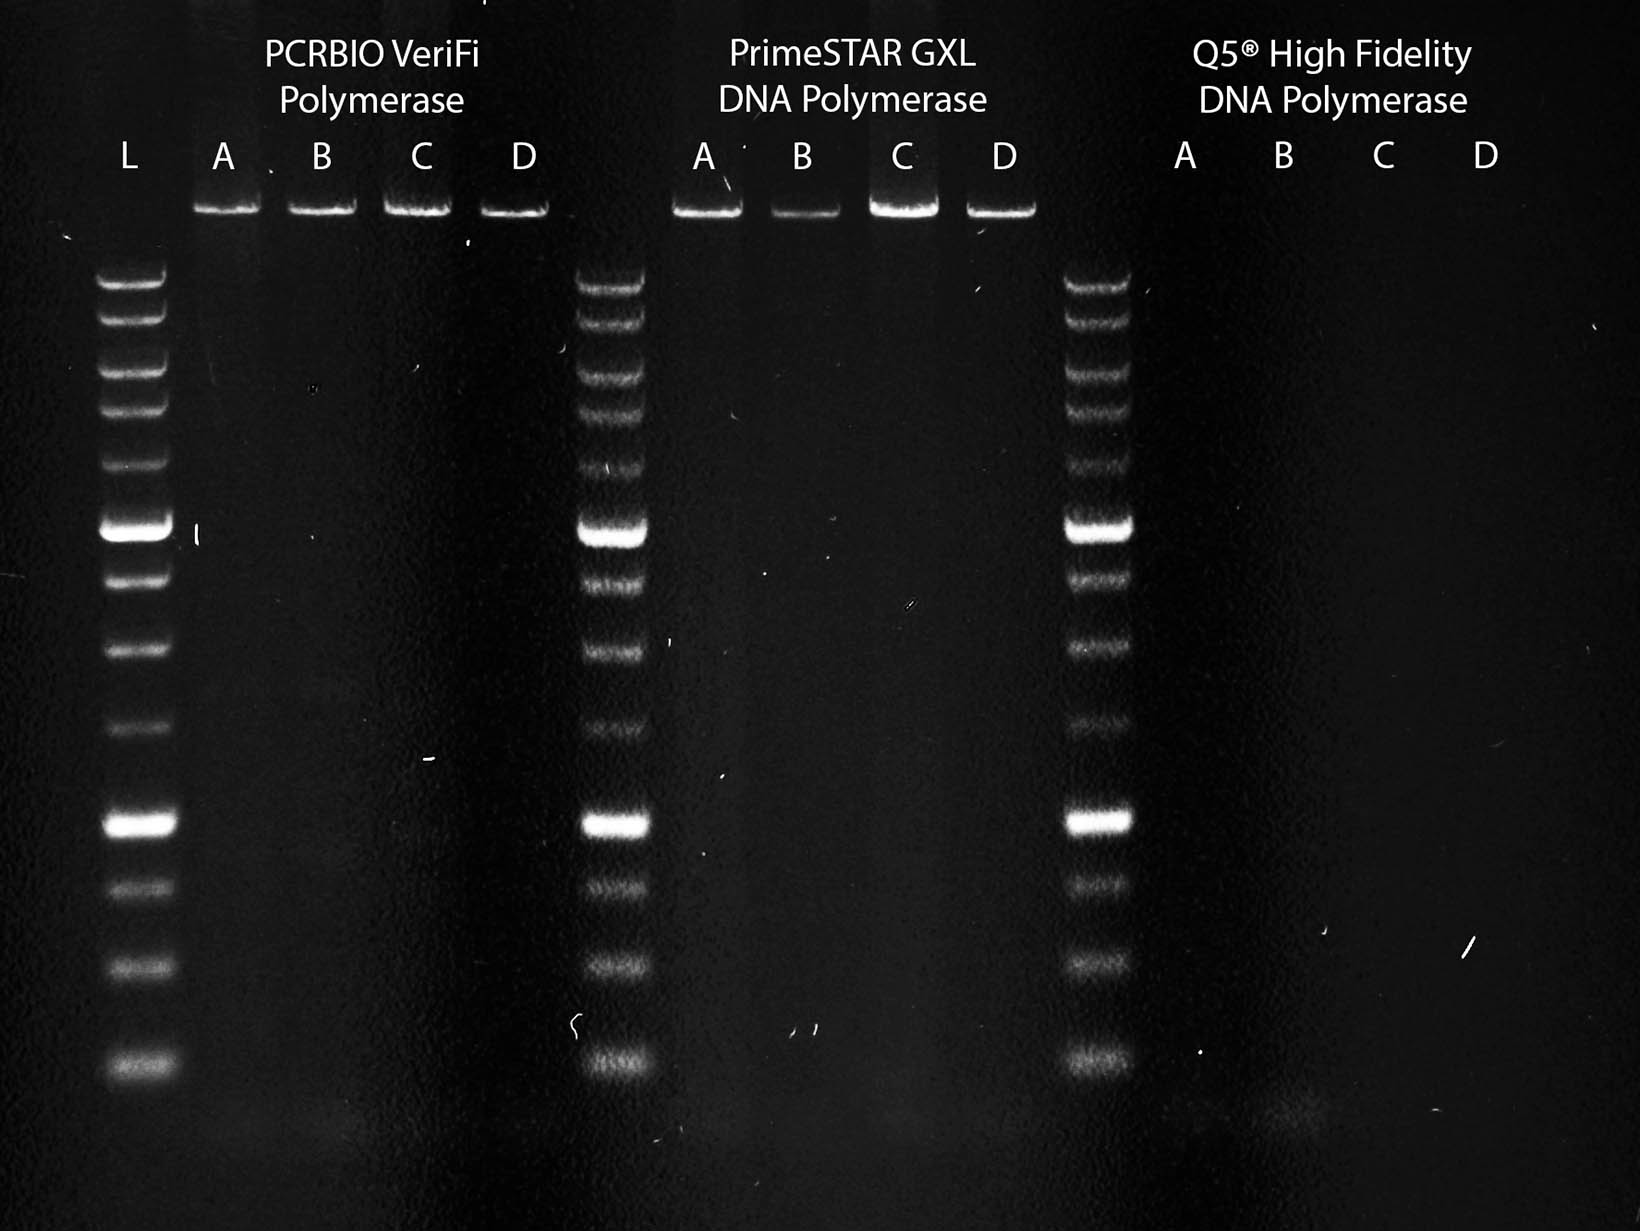 A gel image showing PCRBIO VeriFi Polymerase and Takara PrimeSTAR GXL DNA Polymerase successfully amplifying a 17.5kb DNA fragment. Q5 was unable to amplify the same fragment.